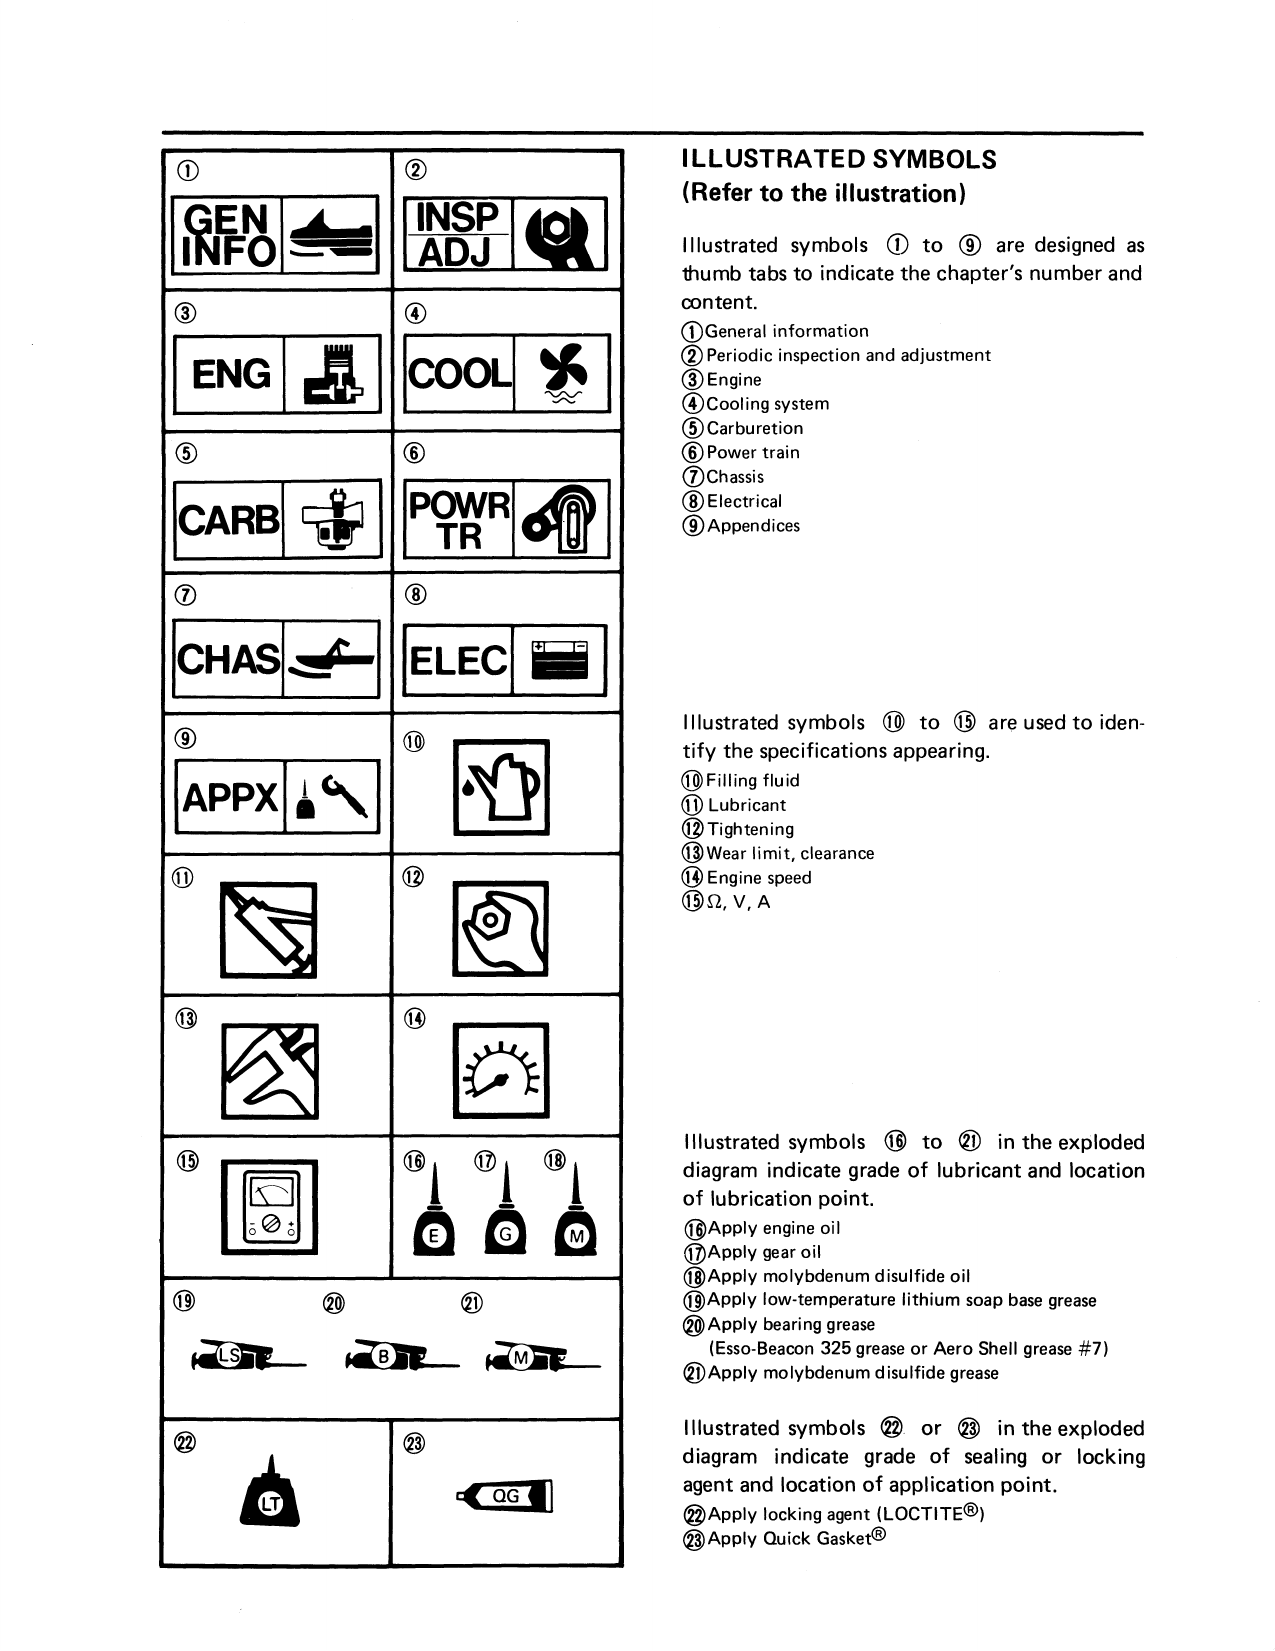 1986-1990 Yamaha Inviter 300, CF300 snowmobile service manual Preview image 1